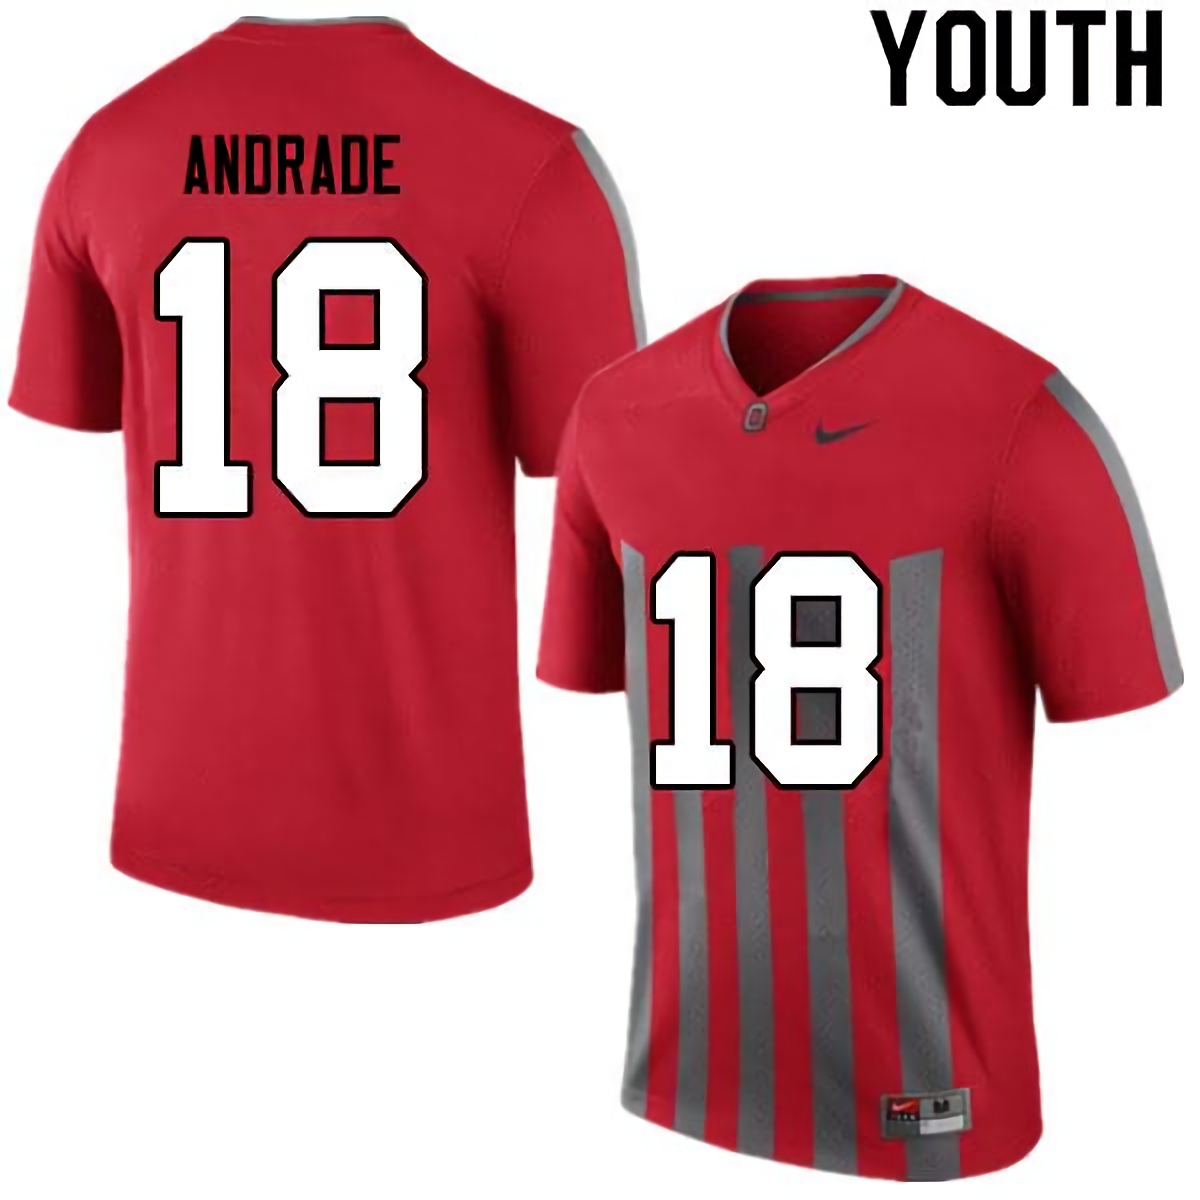 J.P. Andrade Ohio State Buckeyes Youth NCAA #18 Nike Retro College Stitched Football Jersey FBM8756NX